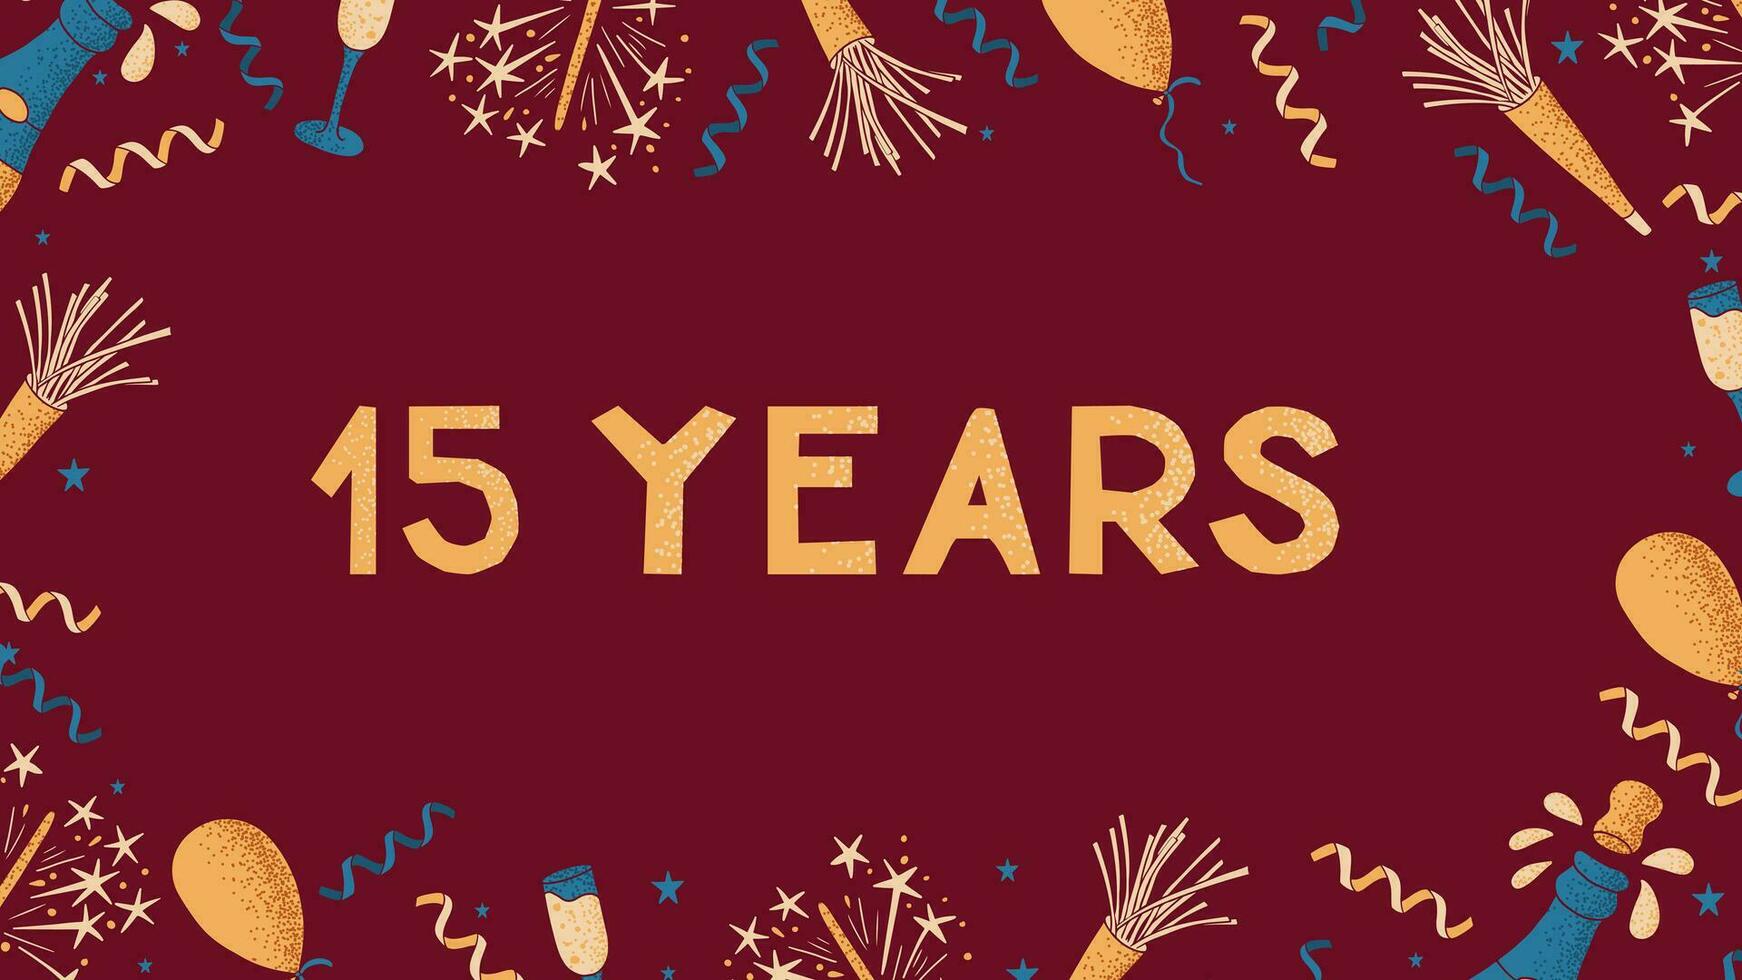 Greeting celebrating banner with text 15 year. Flat composition for anniversary, birthday or wedding. Template of print design with celebrating elements with dotted texture on dark red background. vector